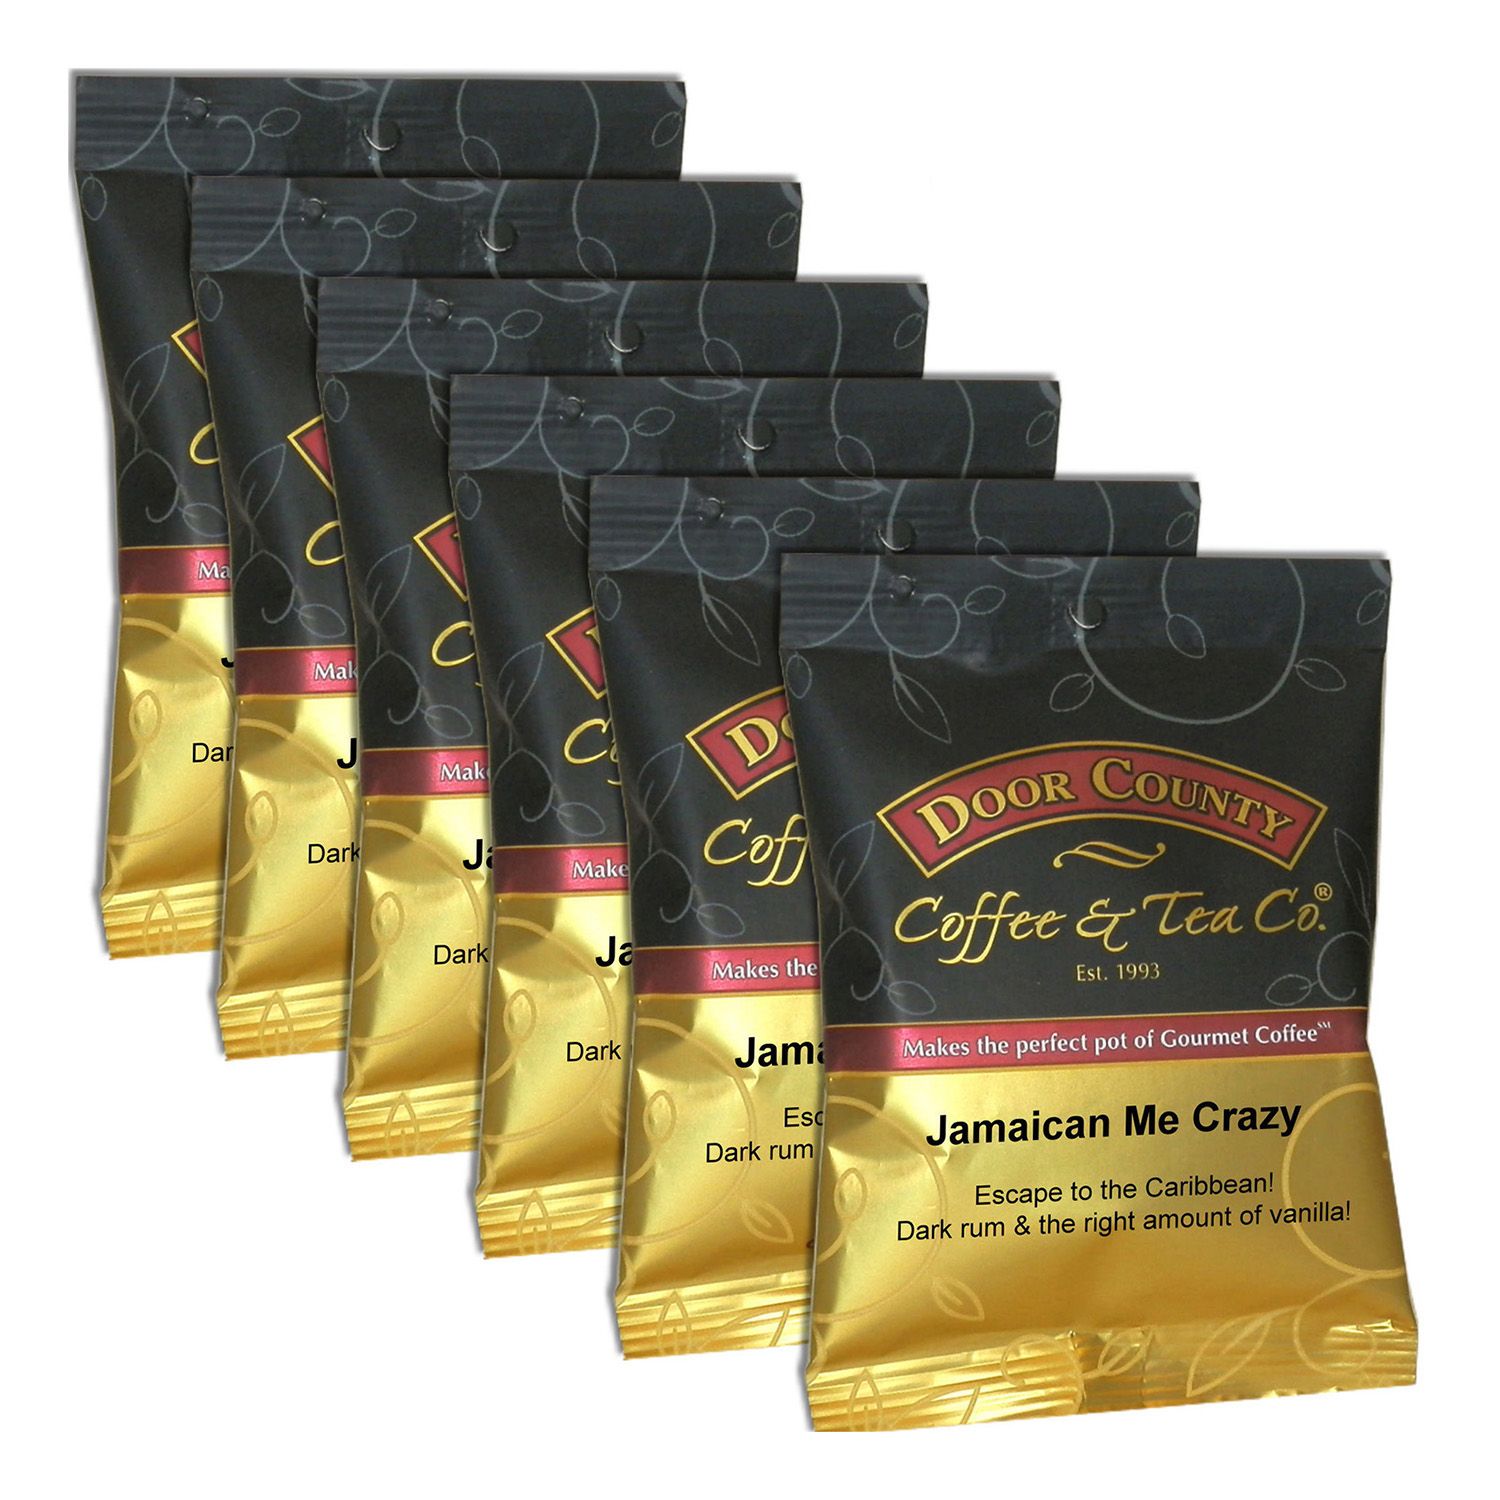 Image for Door County Coffee Jamaican Me Crazy Ground Coffee 6-pk. at Kohl's.